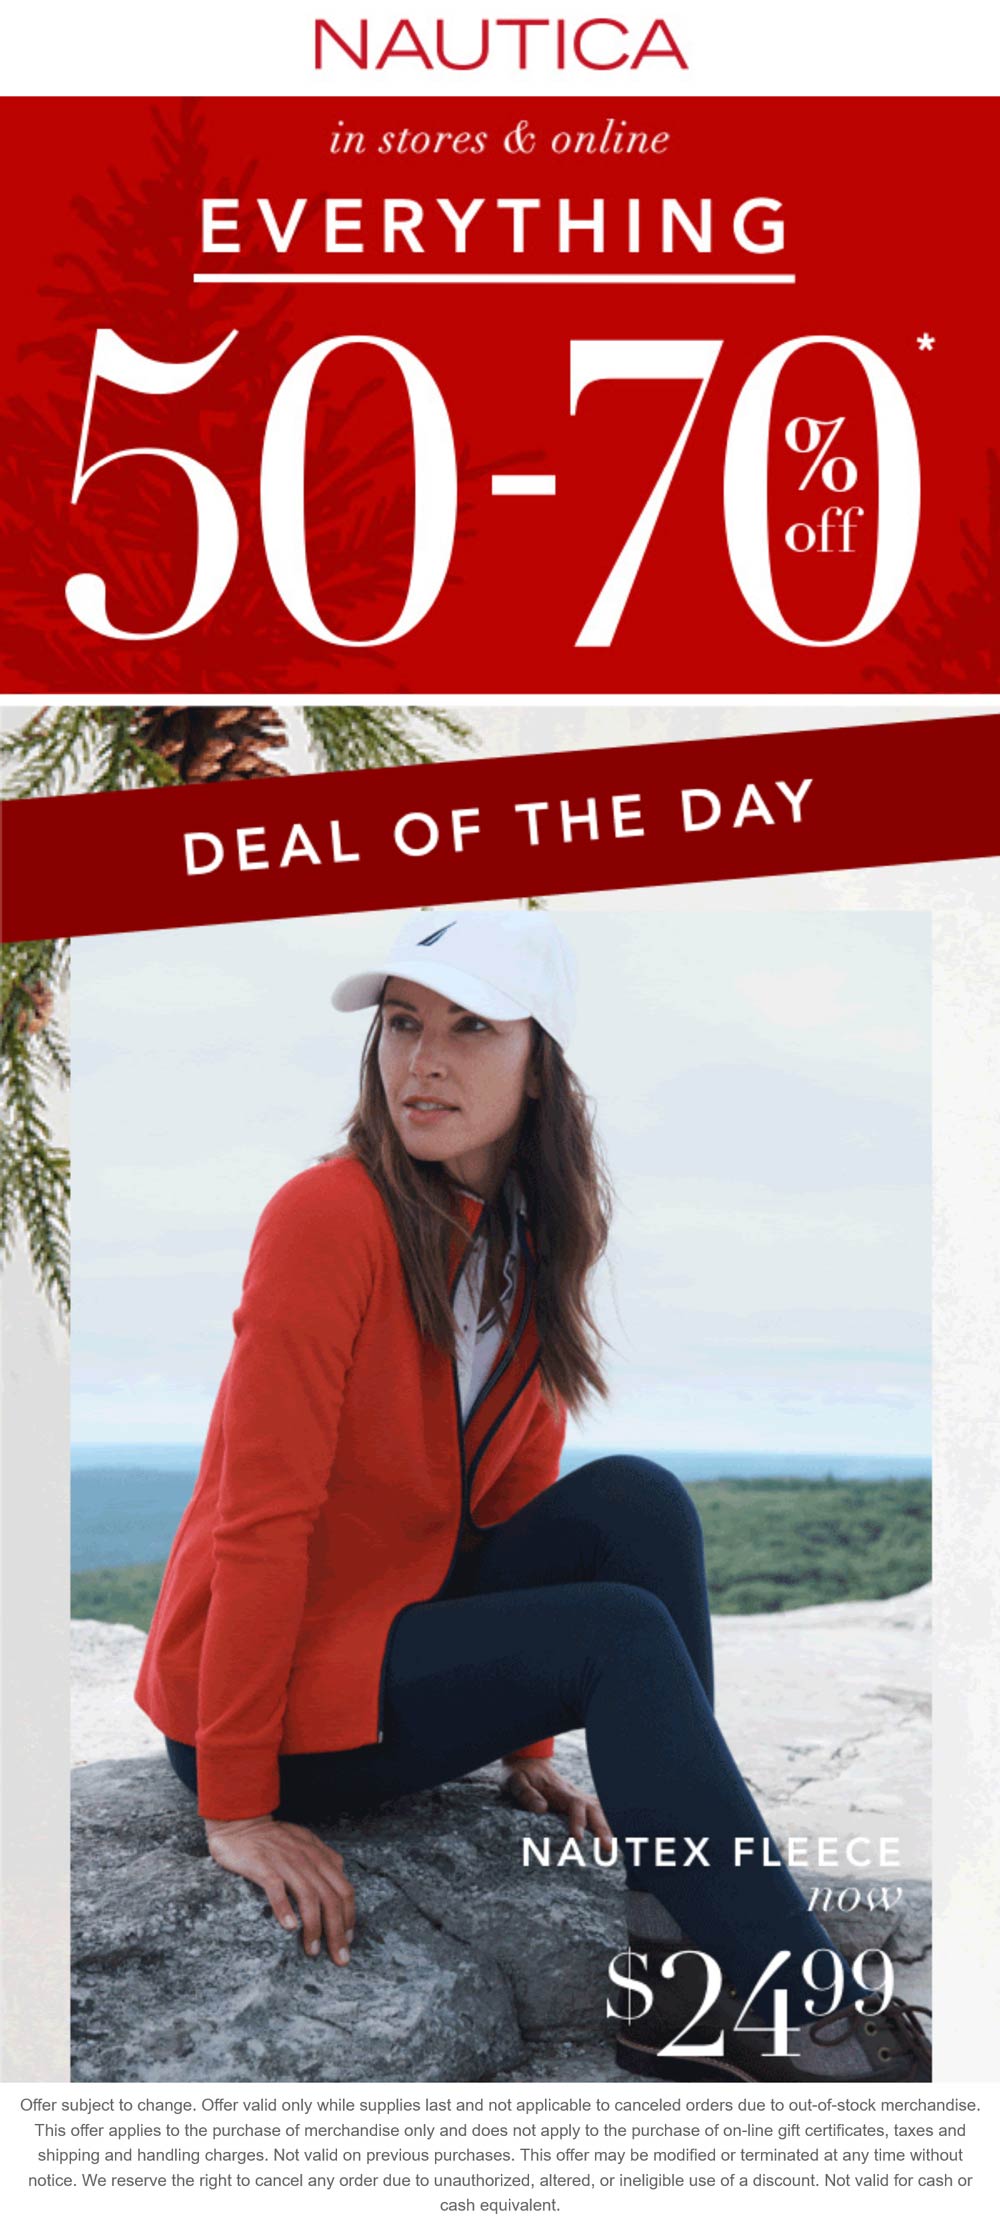 Nautica stores Coupon  50-70% off everything at Nautica, ditto online #nautica 